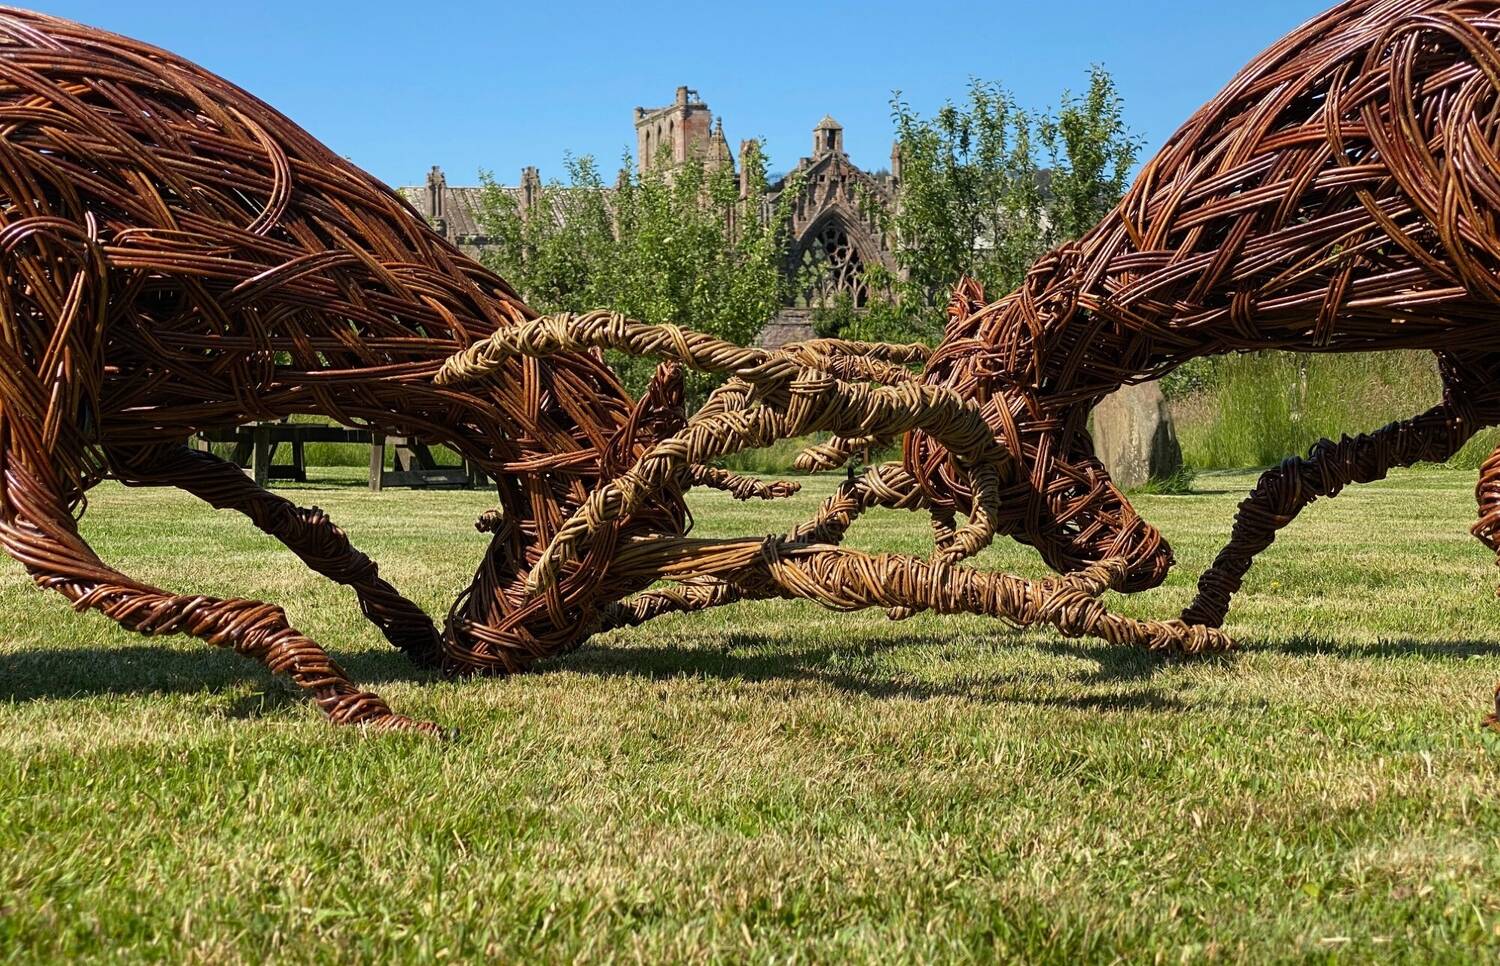 Willow sculpture of two stags engaging their antlers, on display in a garden under a blue sky.